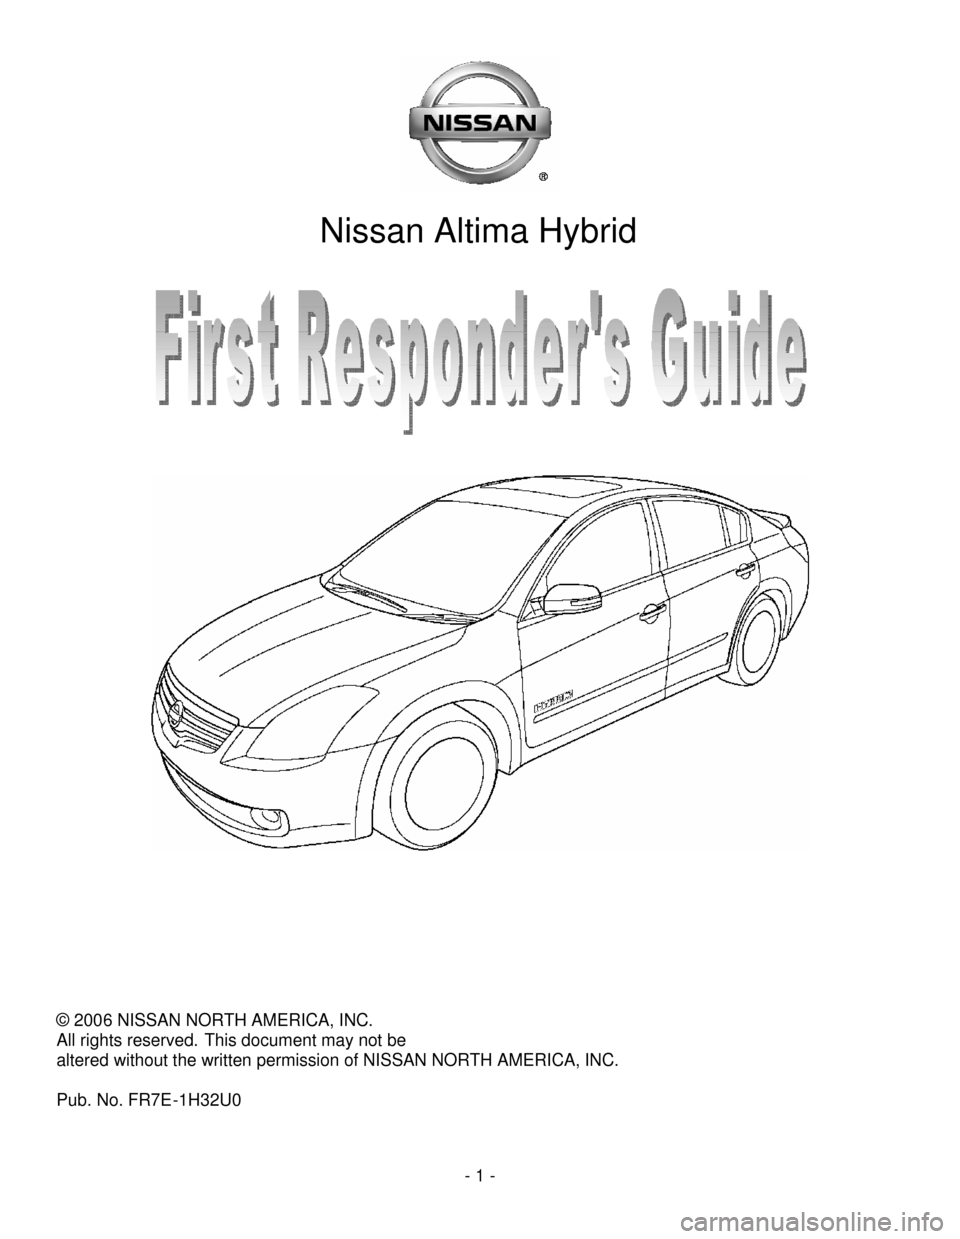 NISSAN ALTIMA HYBRID 2007 L32A / 4.G First Responders Guide 